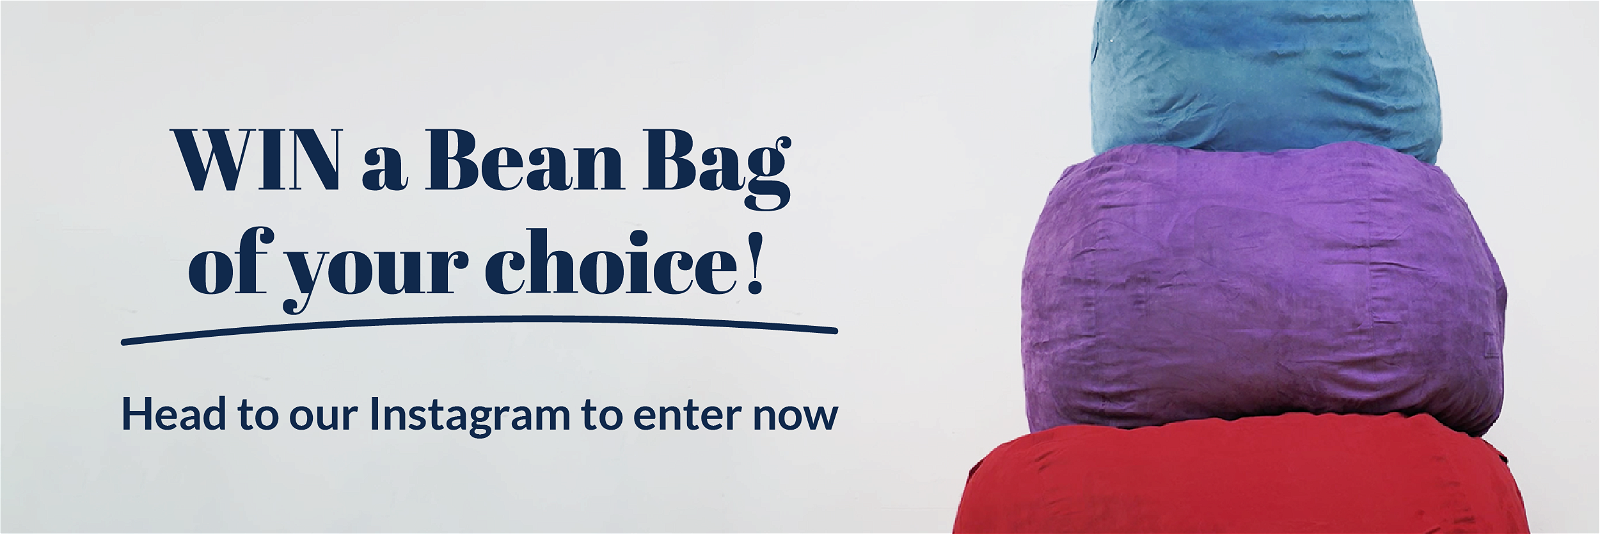 WIN A Bean Bag of your choice! 